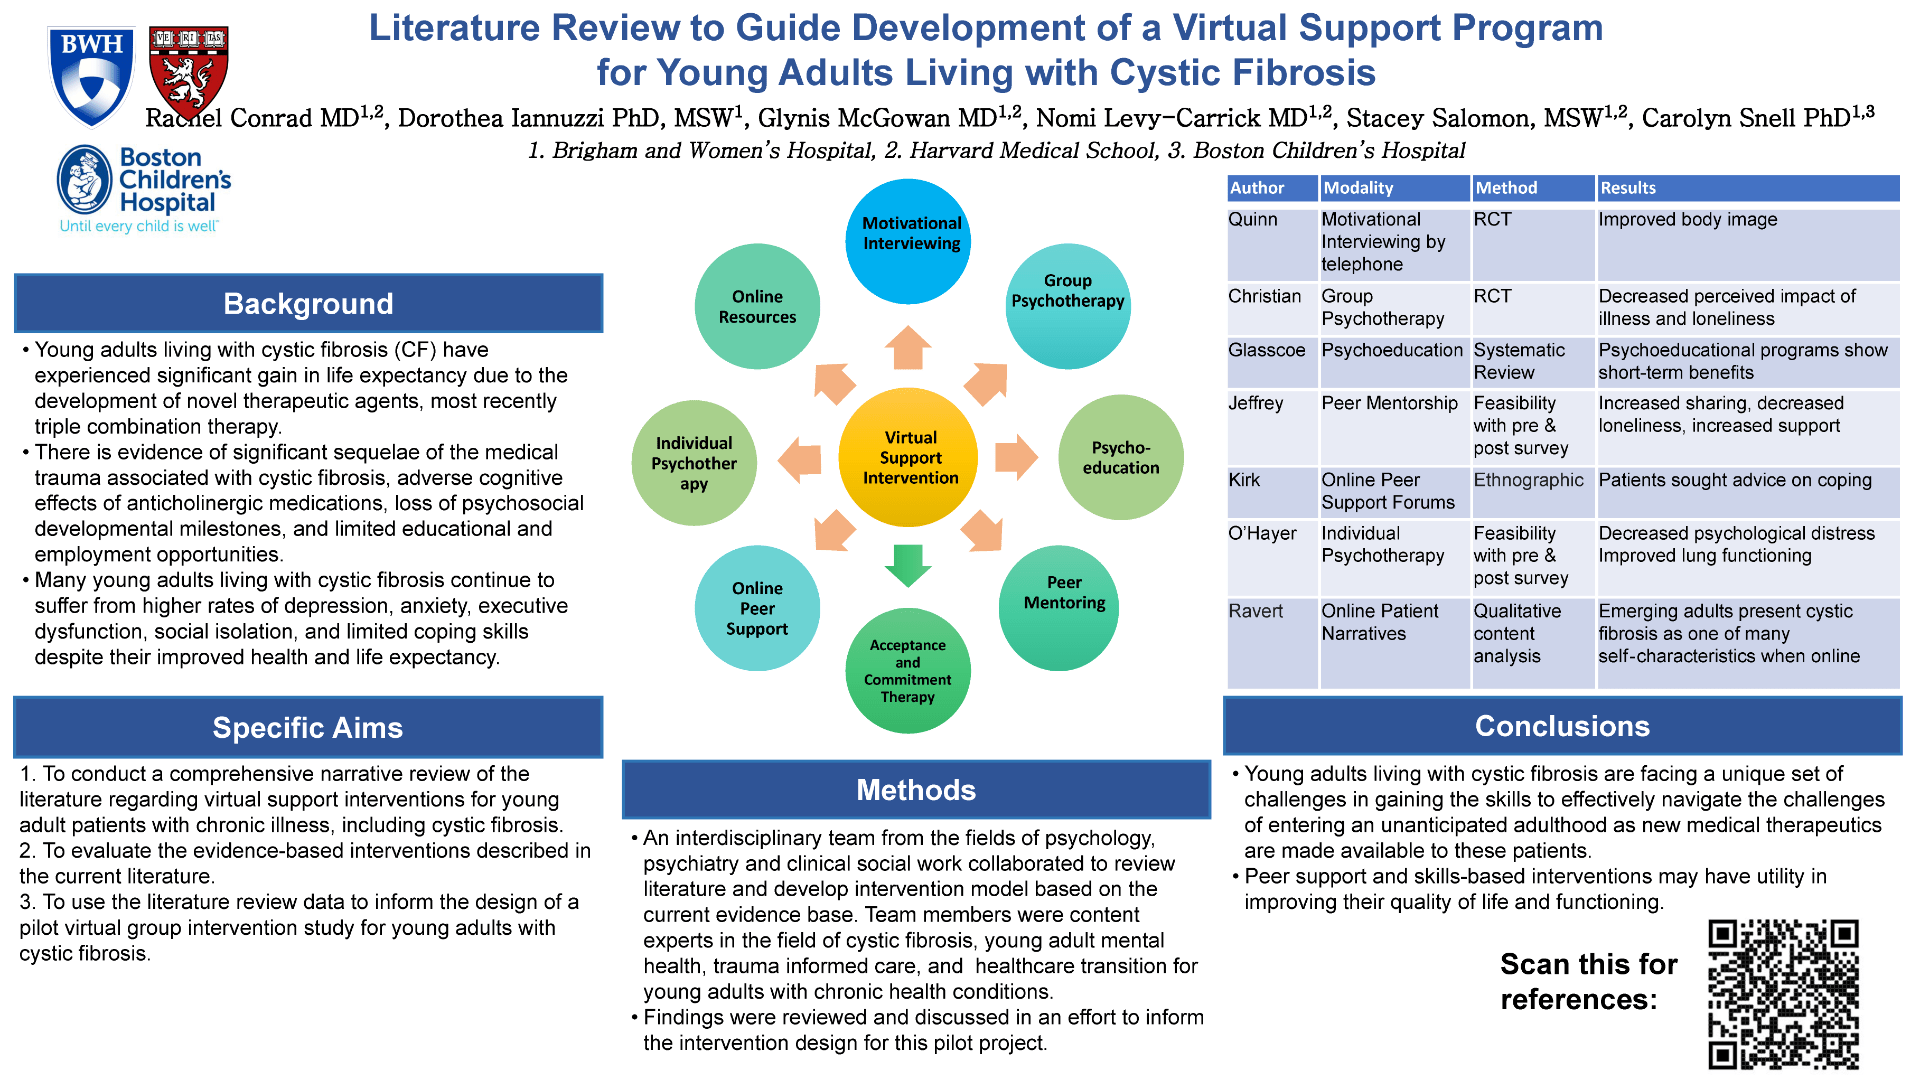 Literature Review to Guide Development of a Peer-support Program for Young Adults Living with Cystic Fibrosis